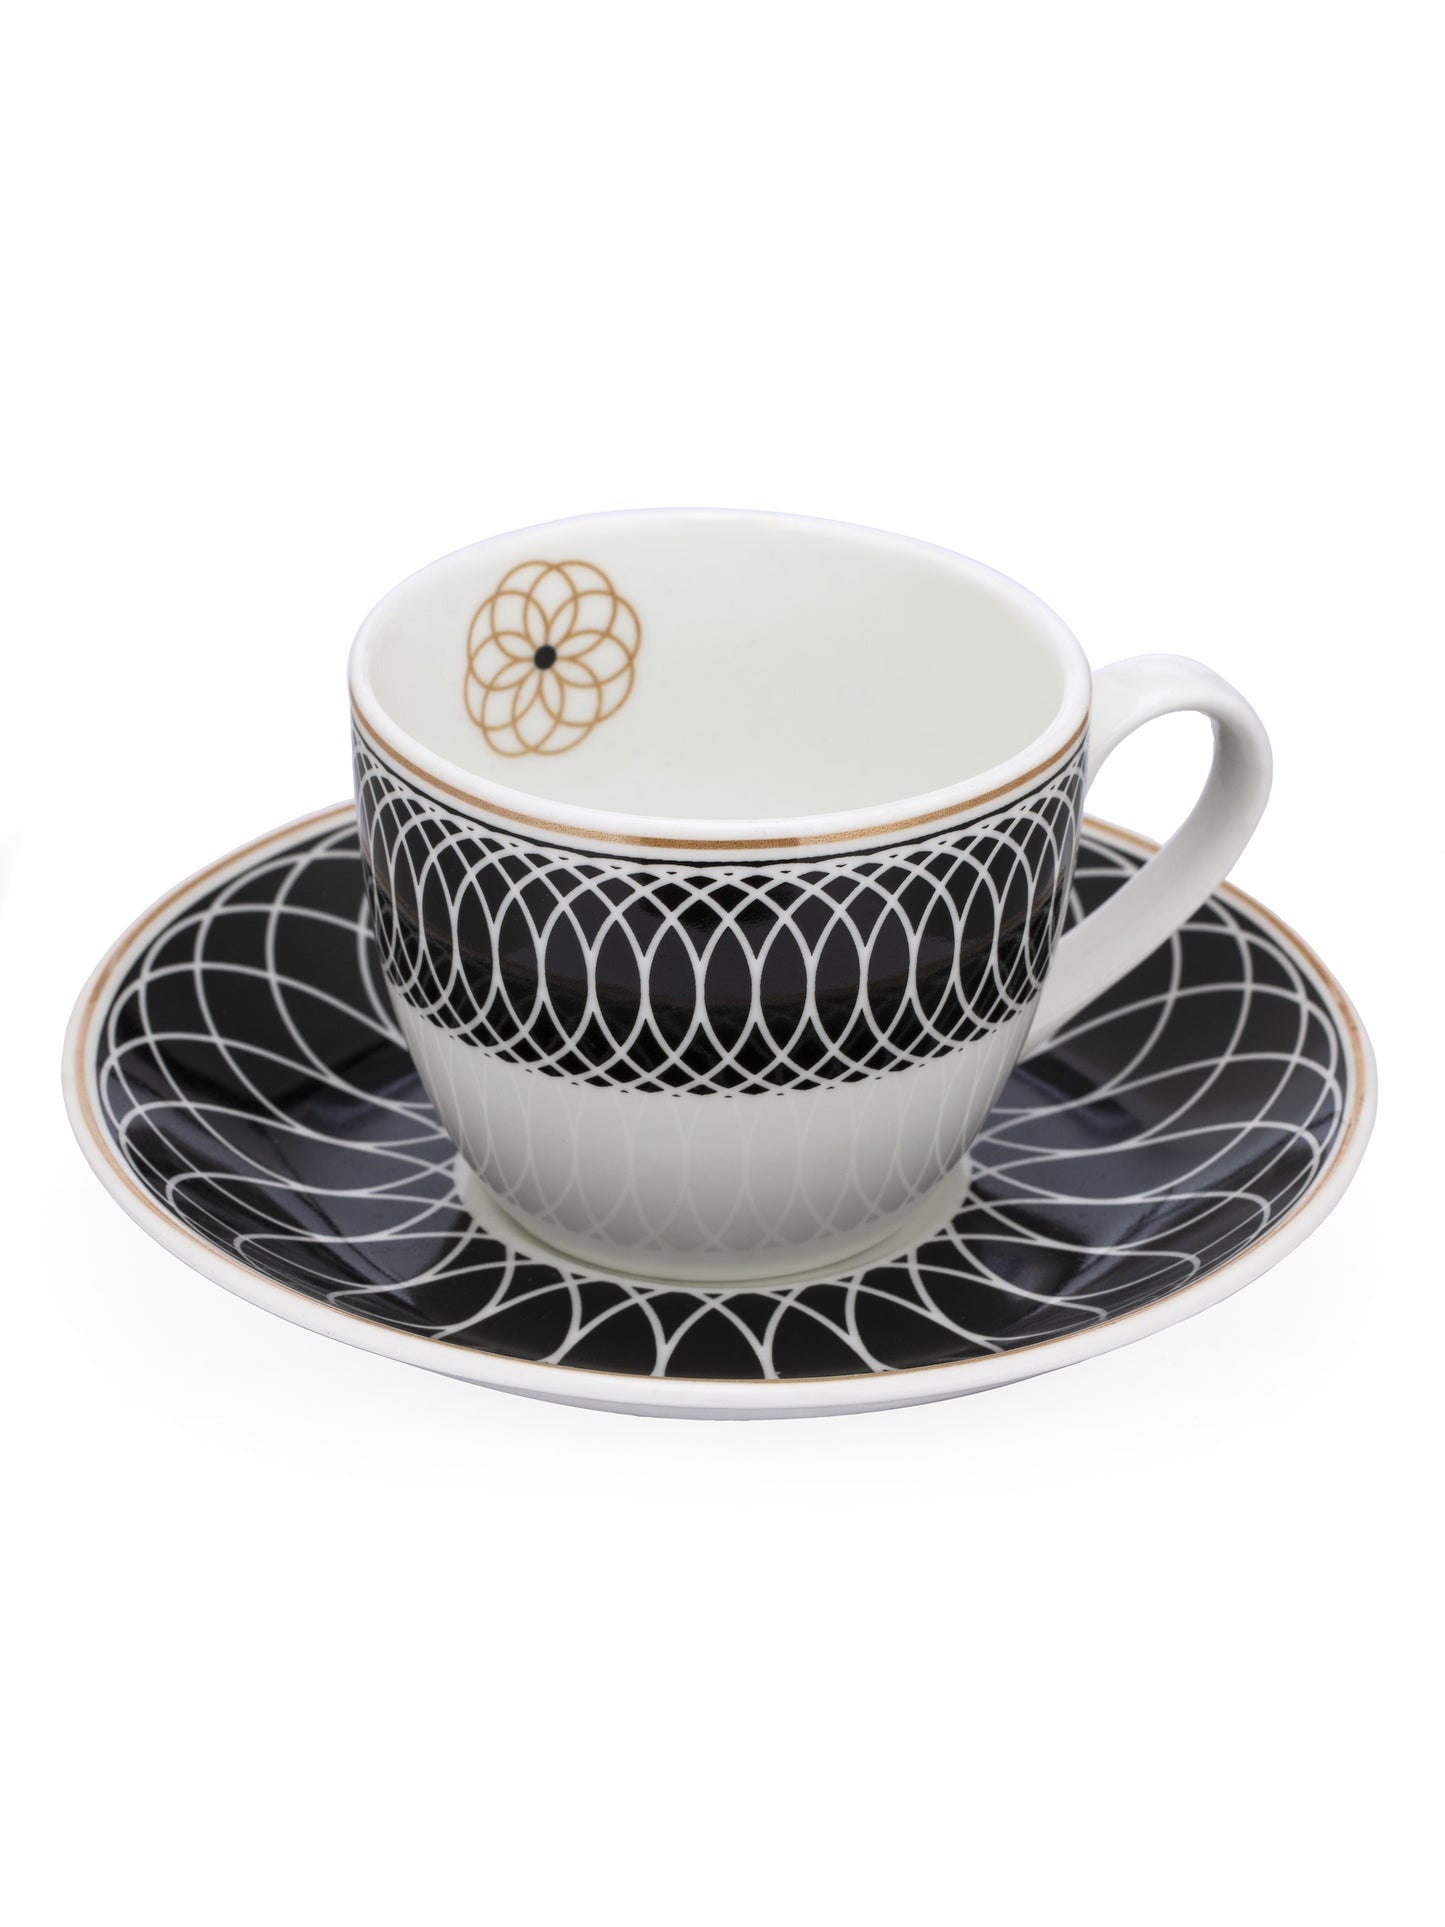 Cream Super Cup & Saucer, 210ml, Set of 12 (6 Cups + 6 Saucers) (S302)